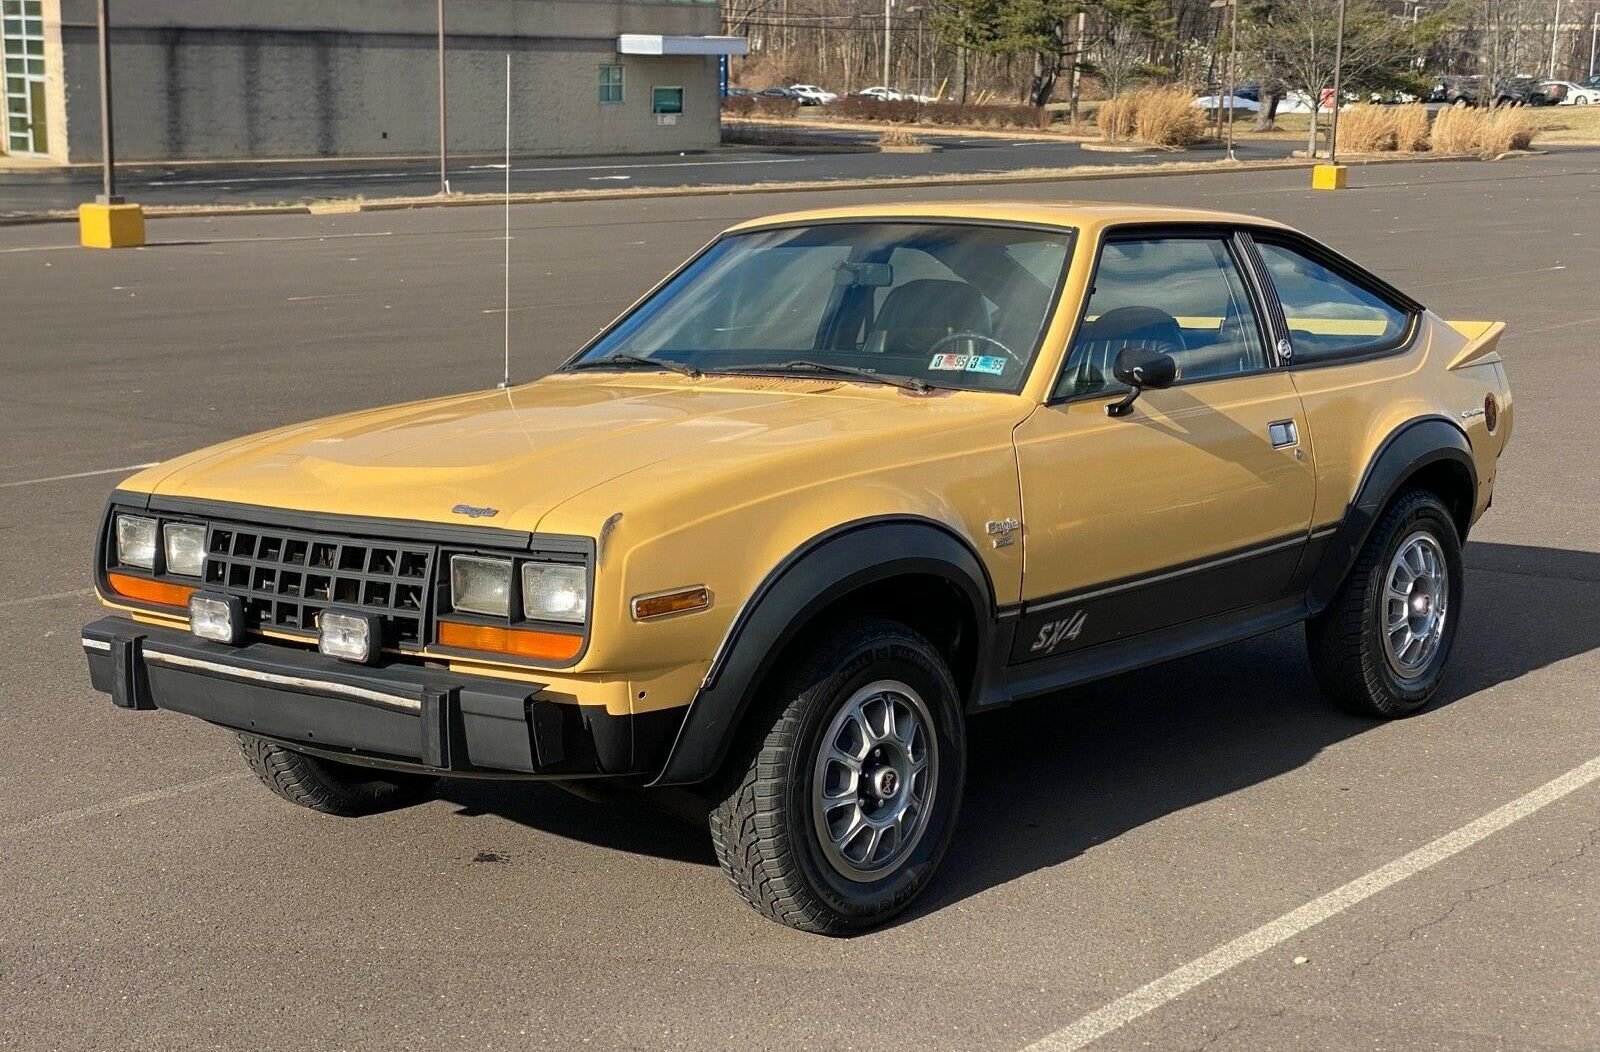 The AMC Eagle SX/4 – An American 4x4 Sports Car That Was Ahead Of Its Time